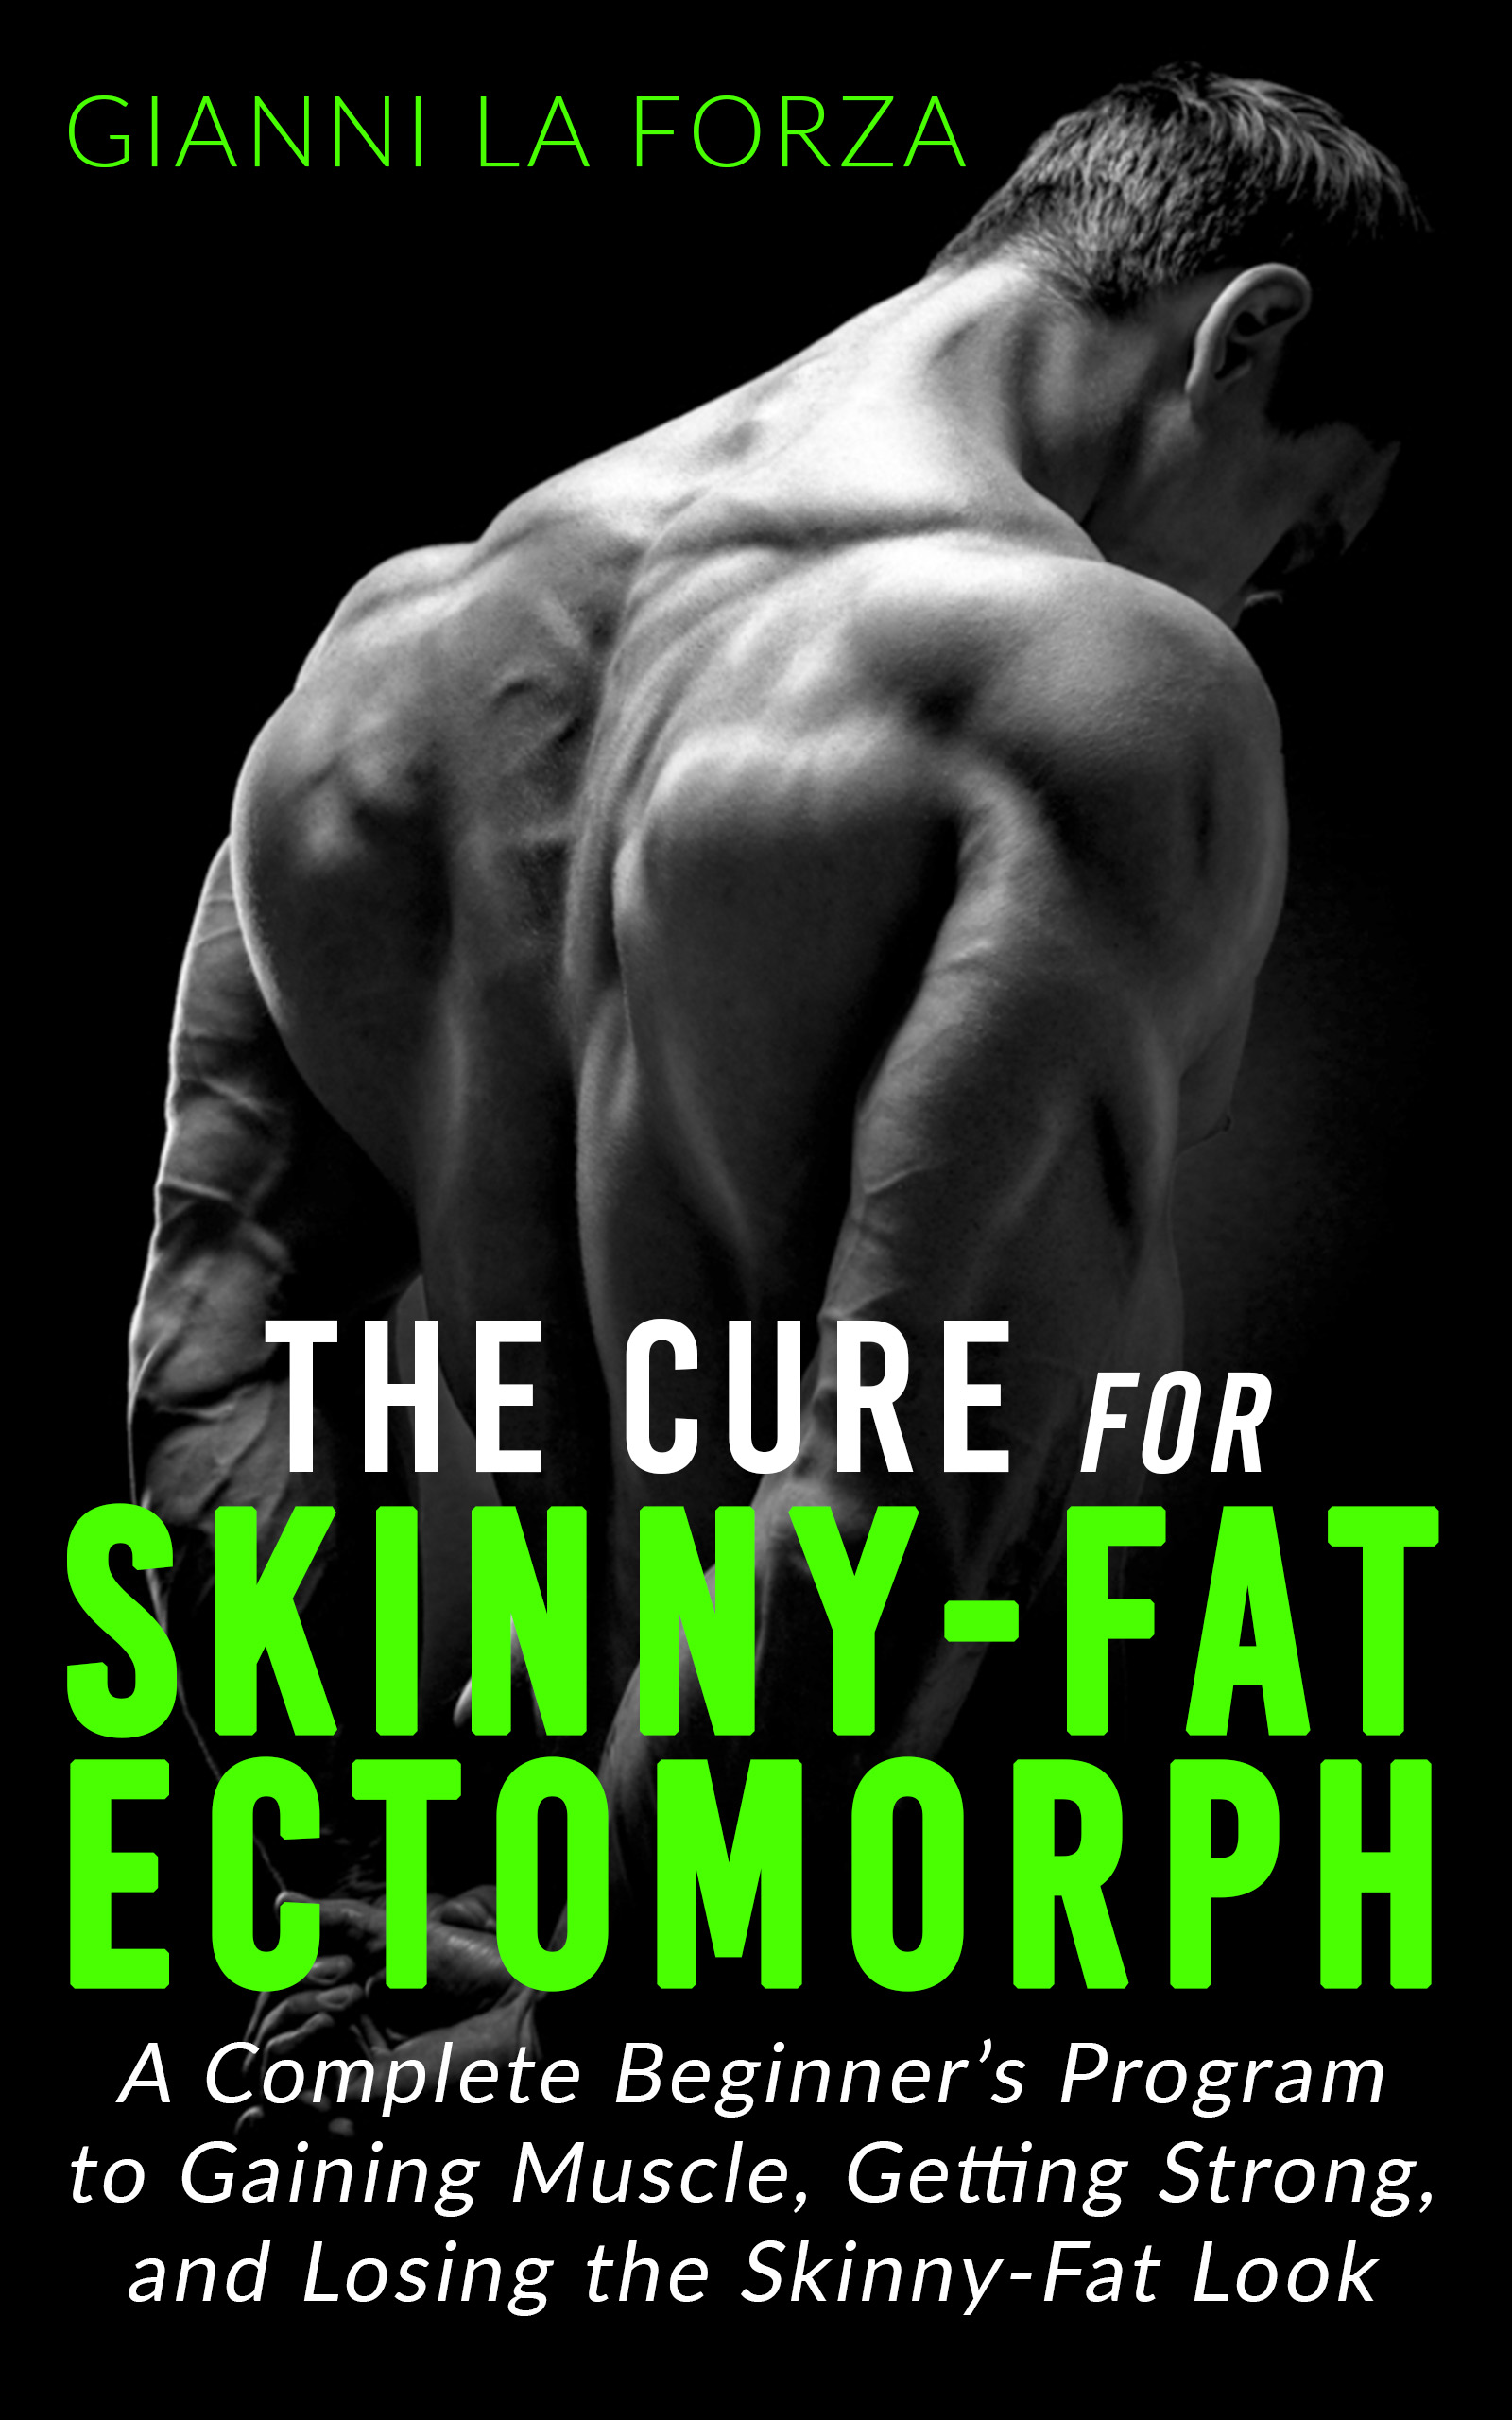 FREE: The Cure for Skinny-Fat Ectomorph by Gianni La Forza